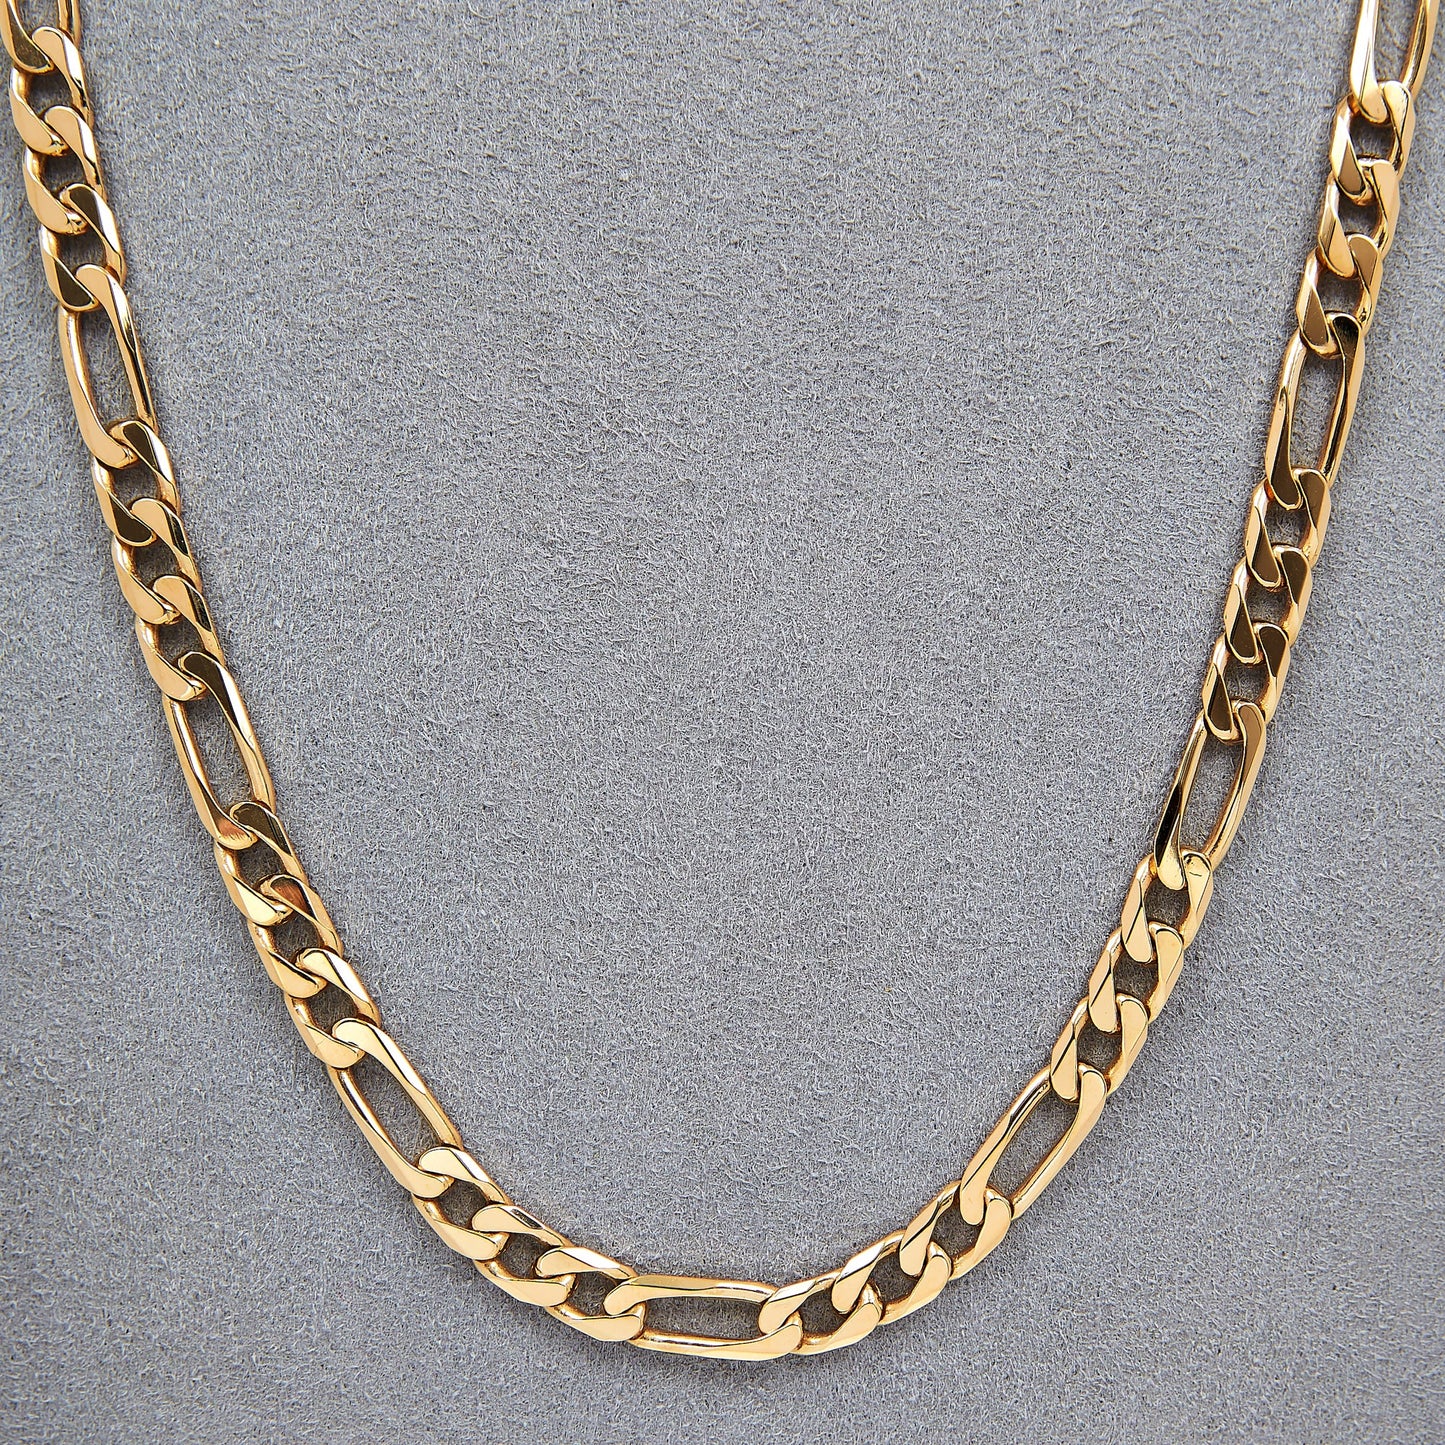 Pre-Owned 9ct Gold 21 Inch 3&1 Figaro Chain Necklace